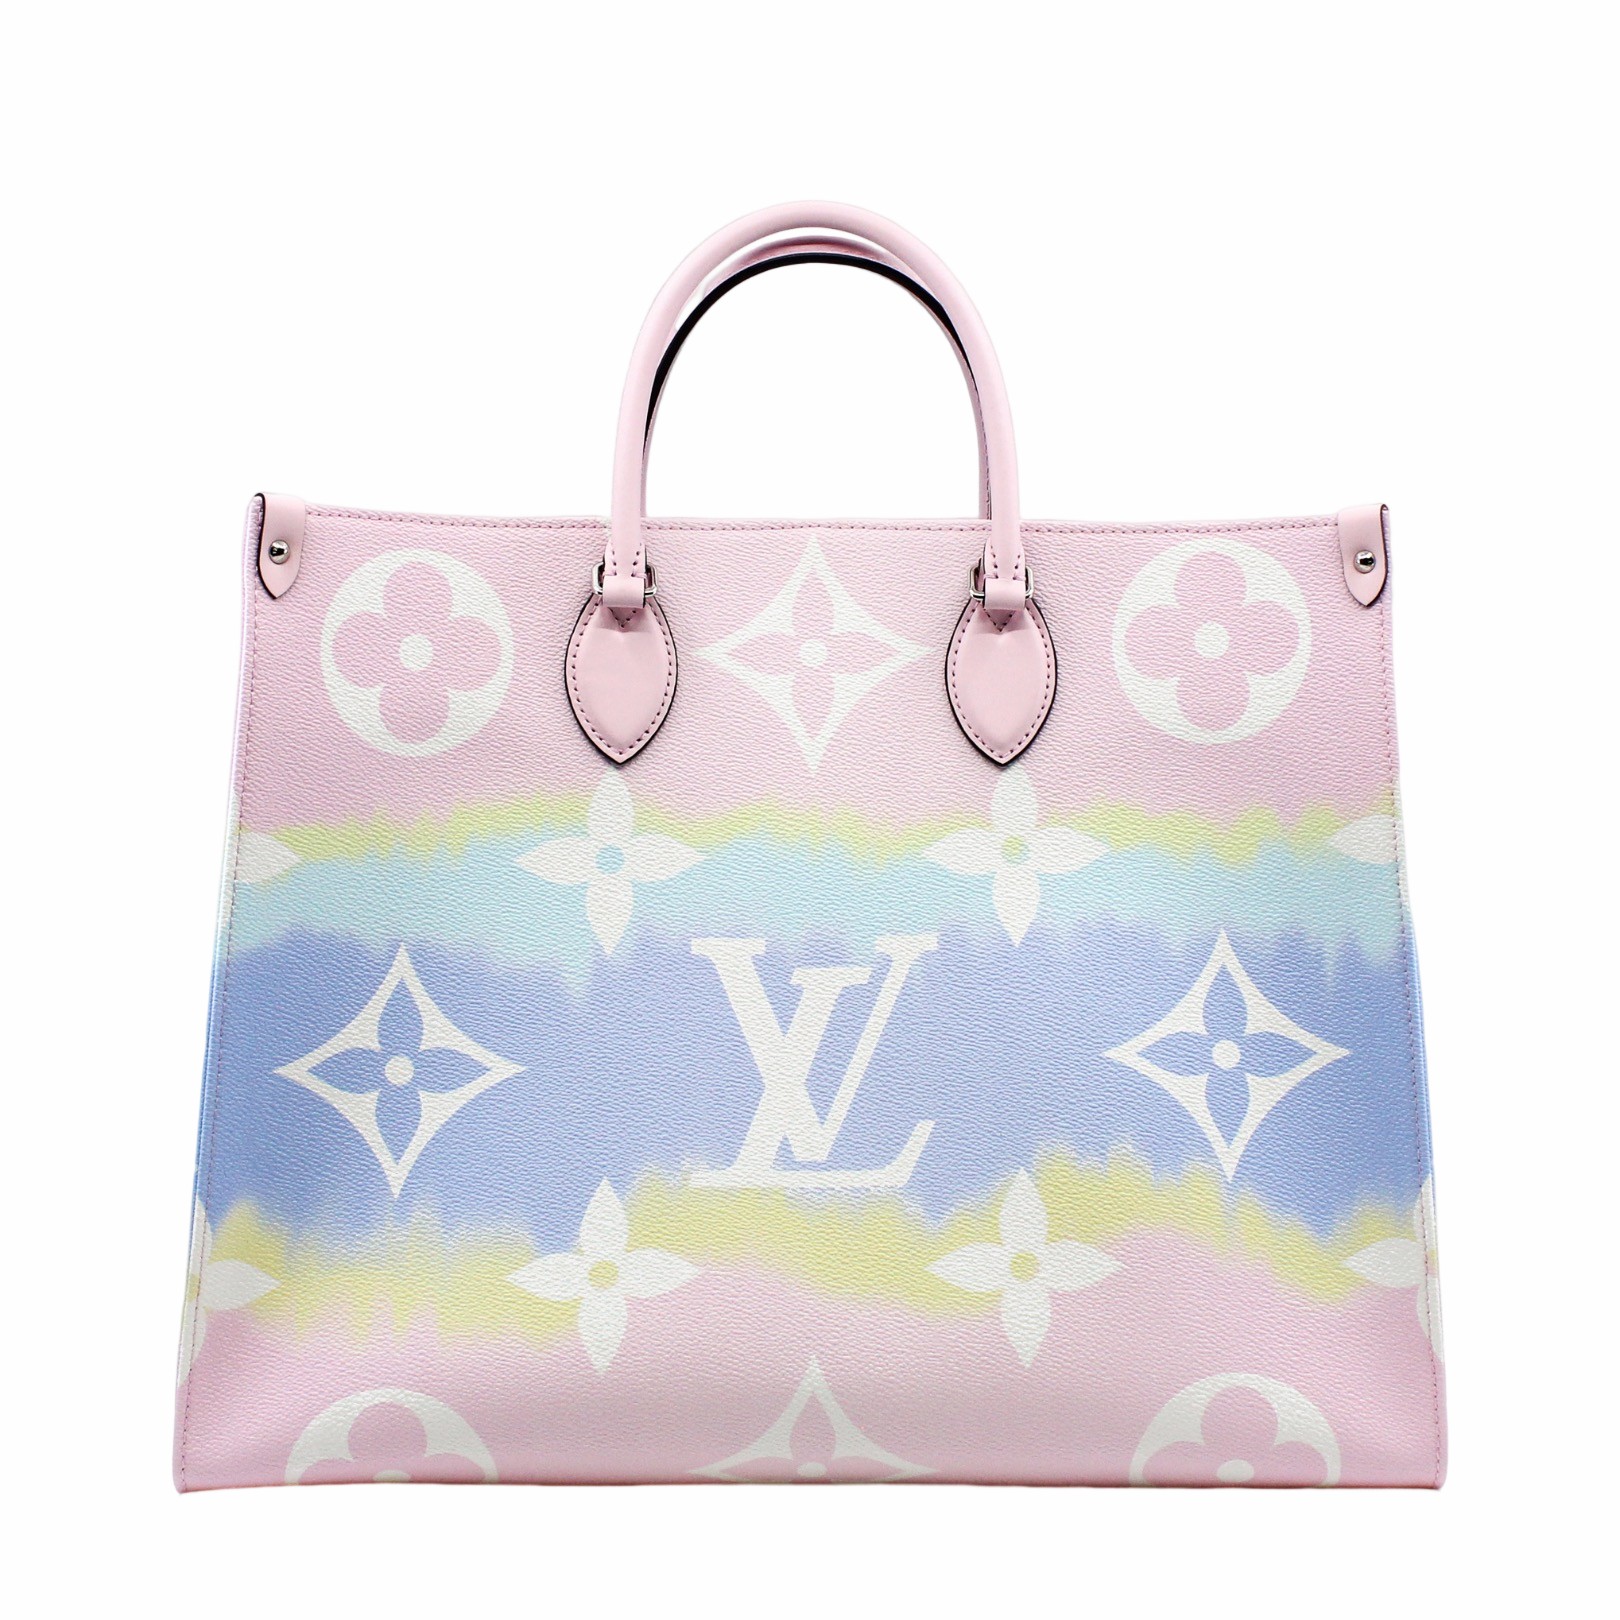 BRAND NEW Limited Edition Louis Vuitton Onthego Escale Pastel